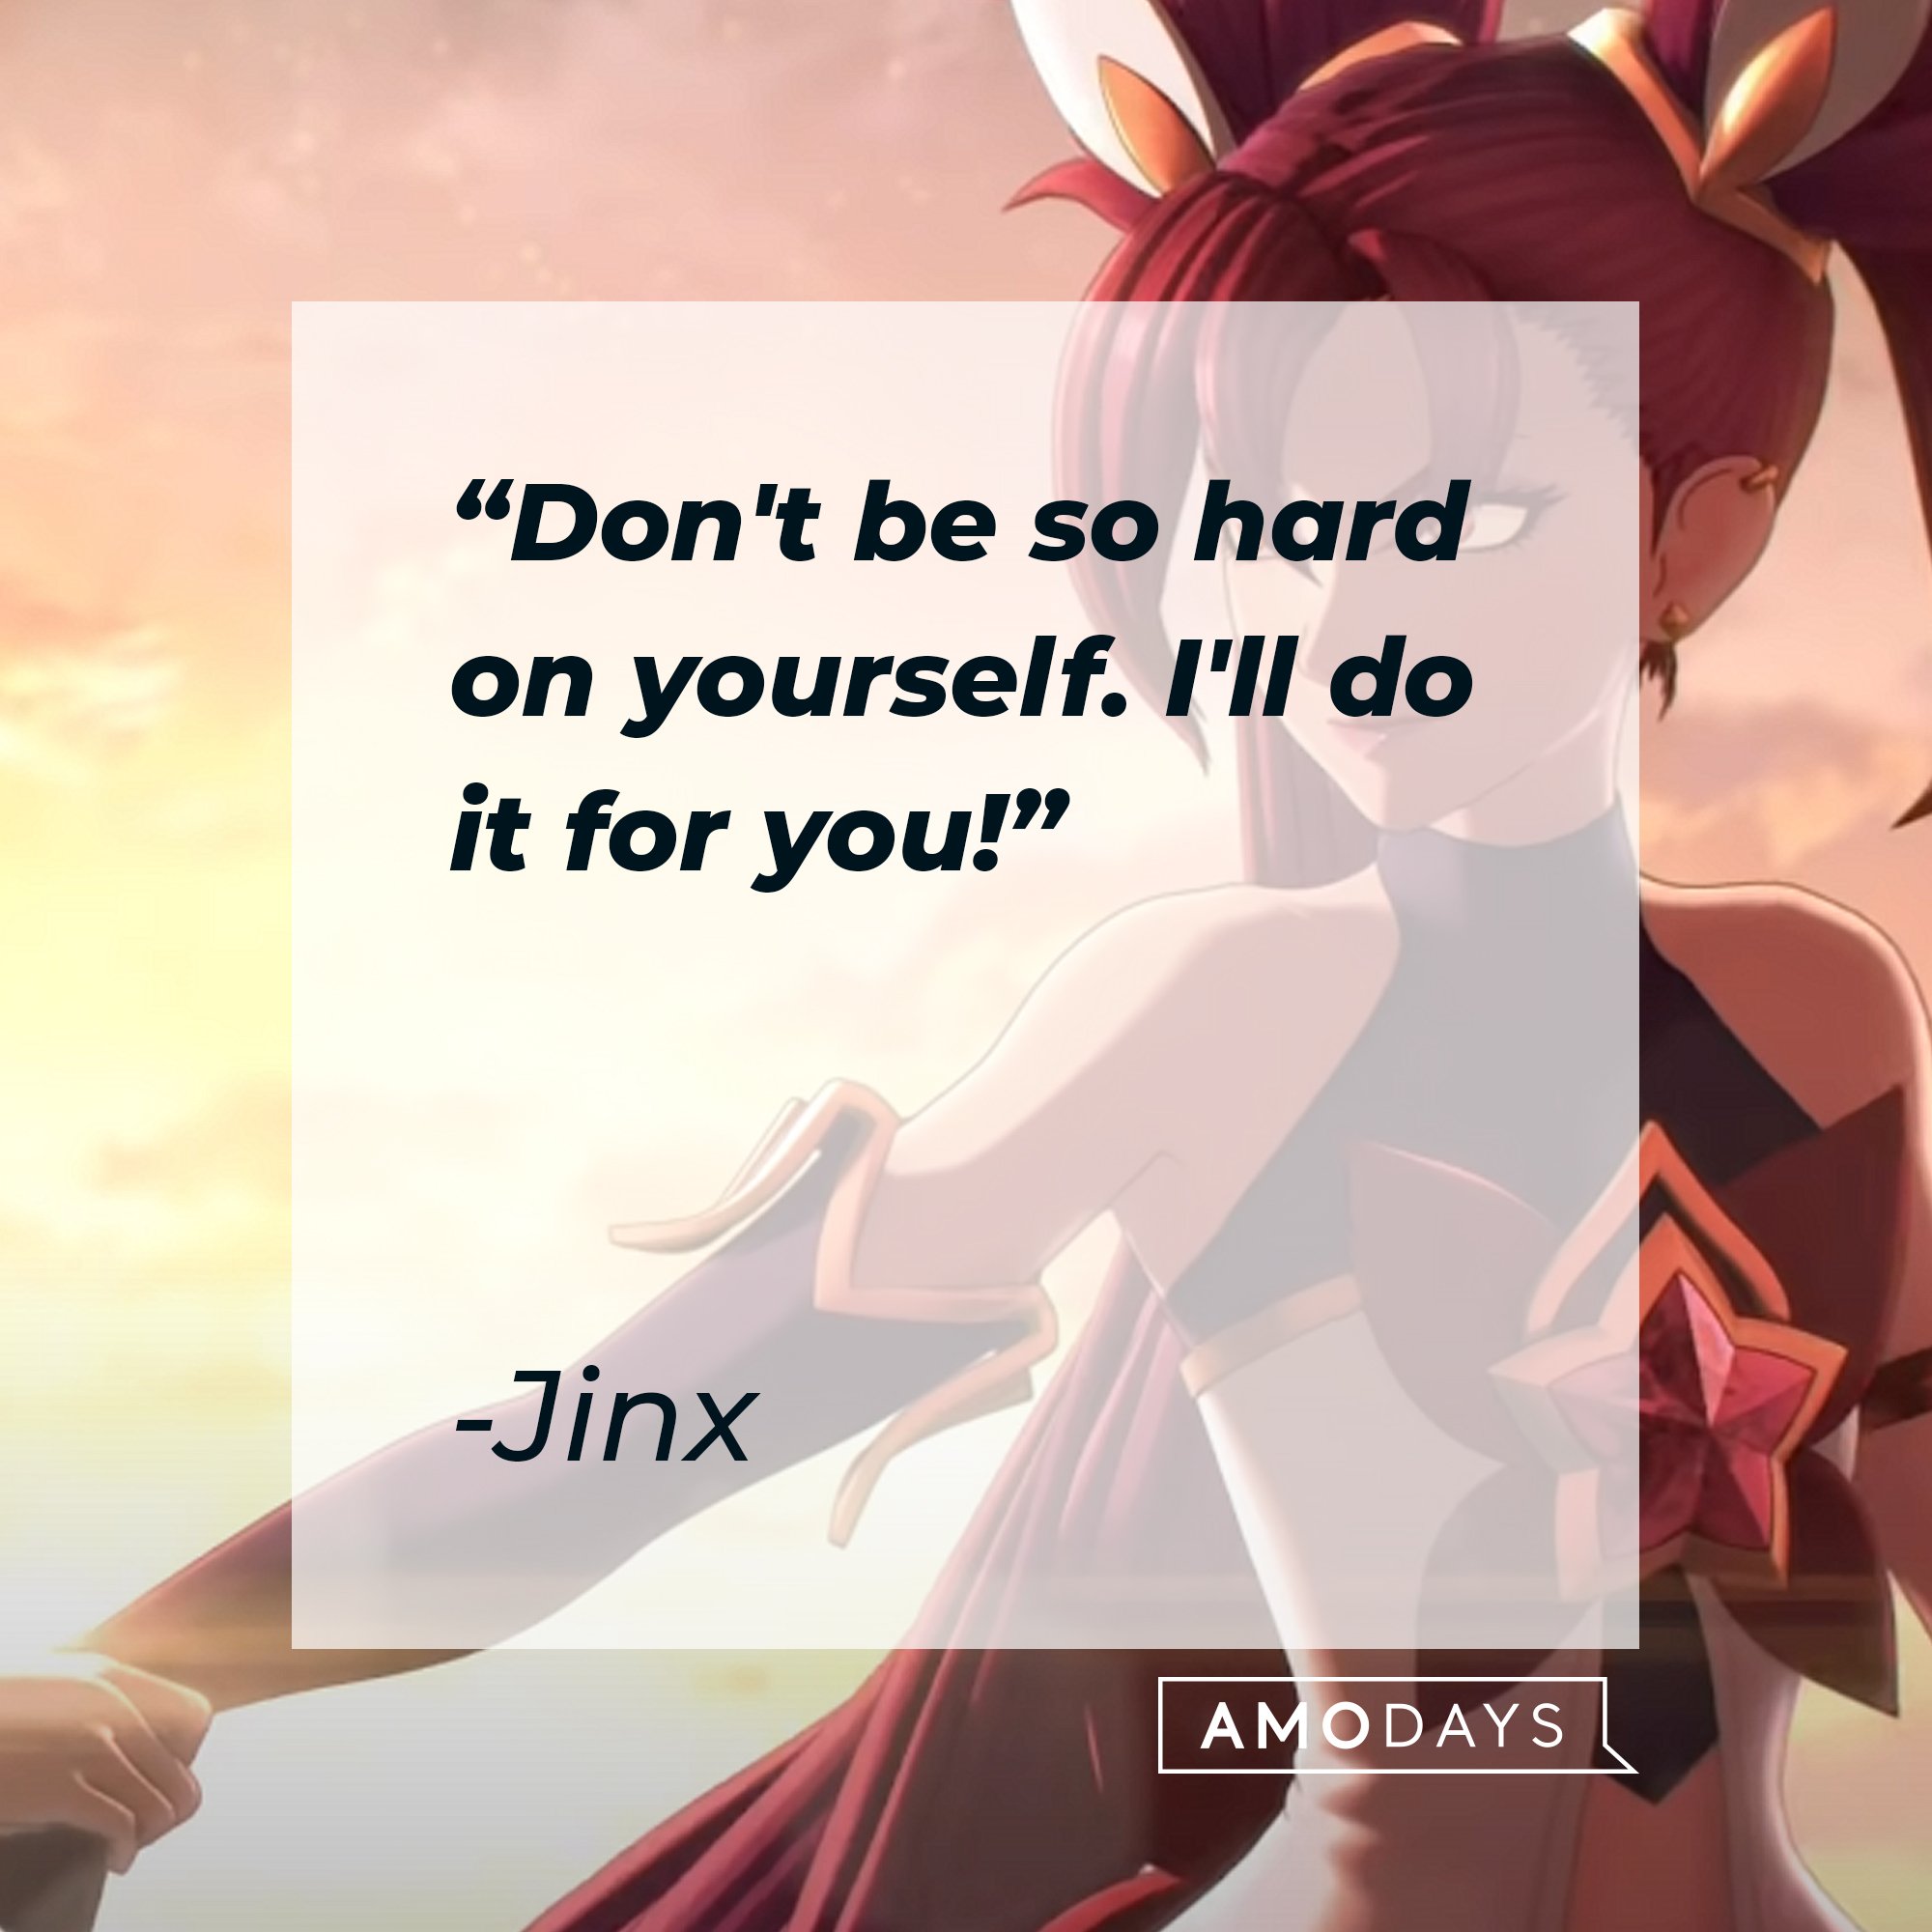 Jinx's quote: "Don't be so hard on yourself. I'll do it for you!" | Image: AmoDays